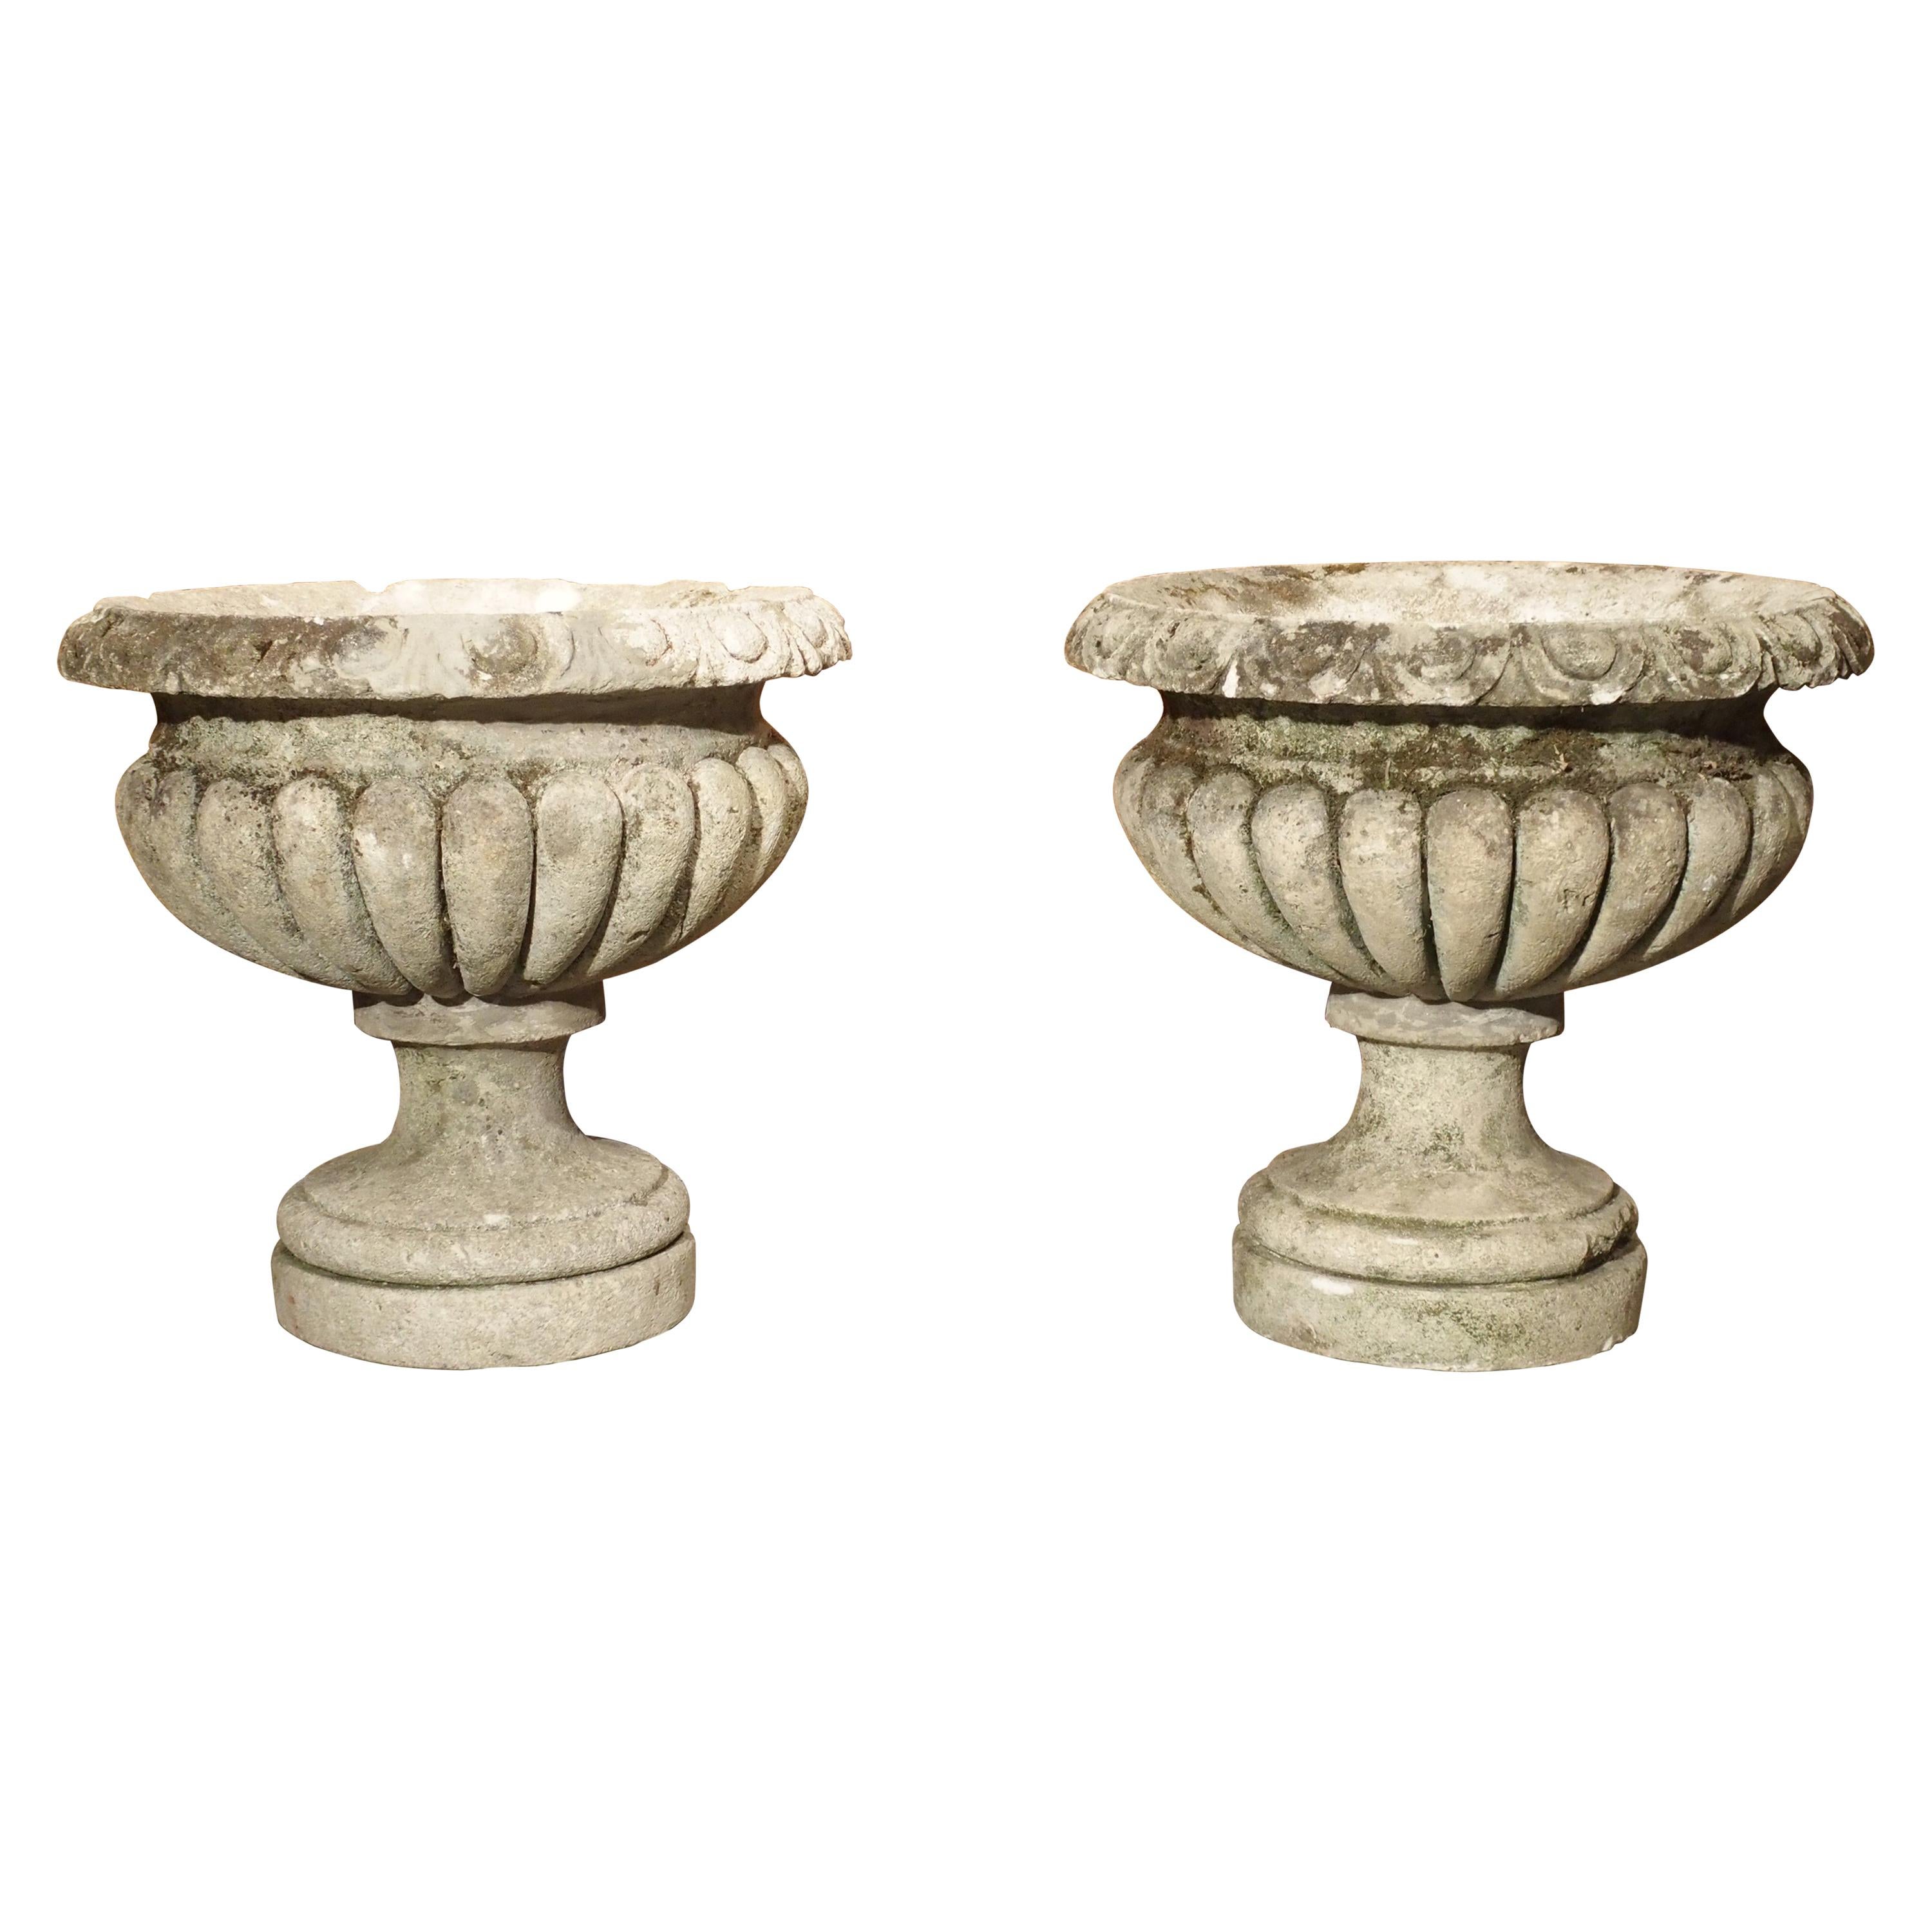 Carved Vicenza Stone Vases from Italy, circa 1900